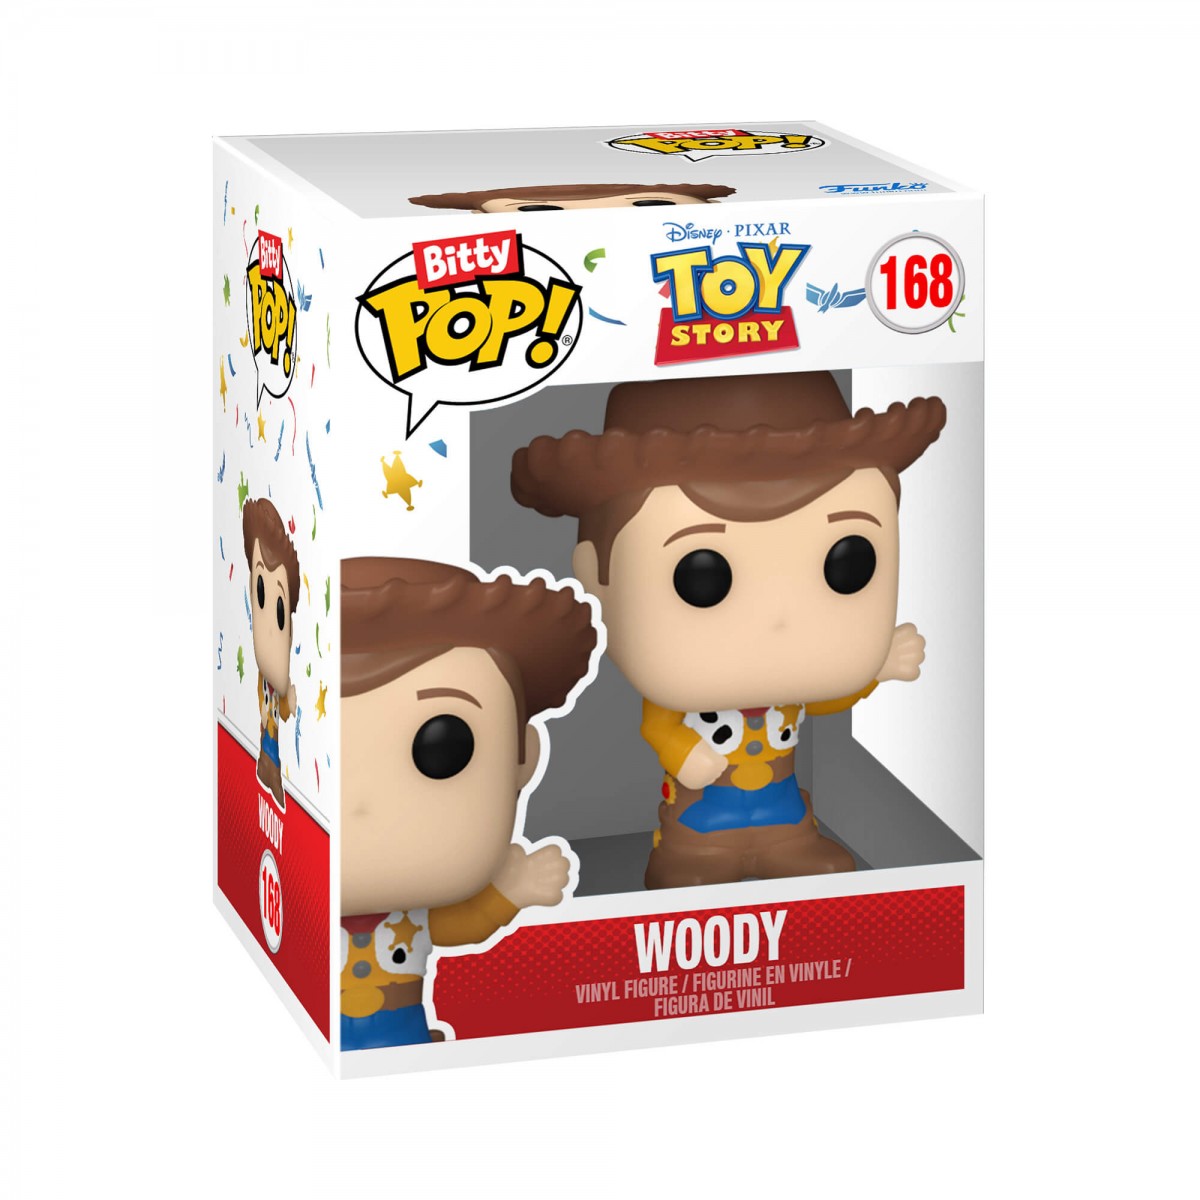 Toy Story Collection Pop, Funko Pop Rex Toy Story